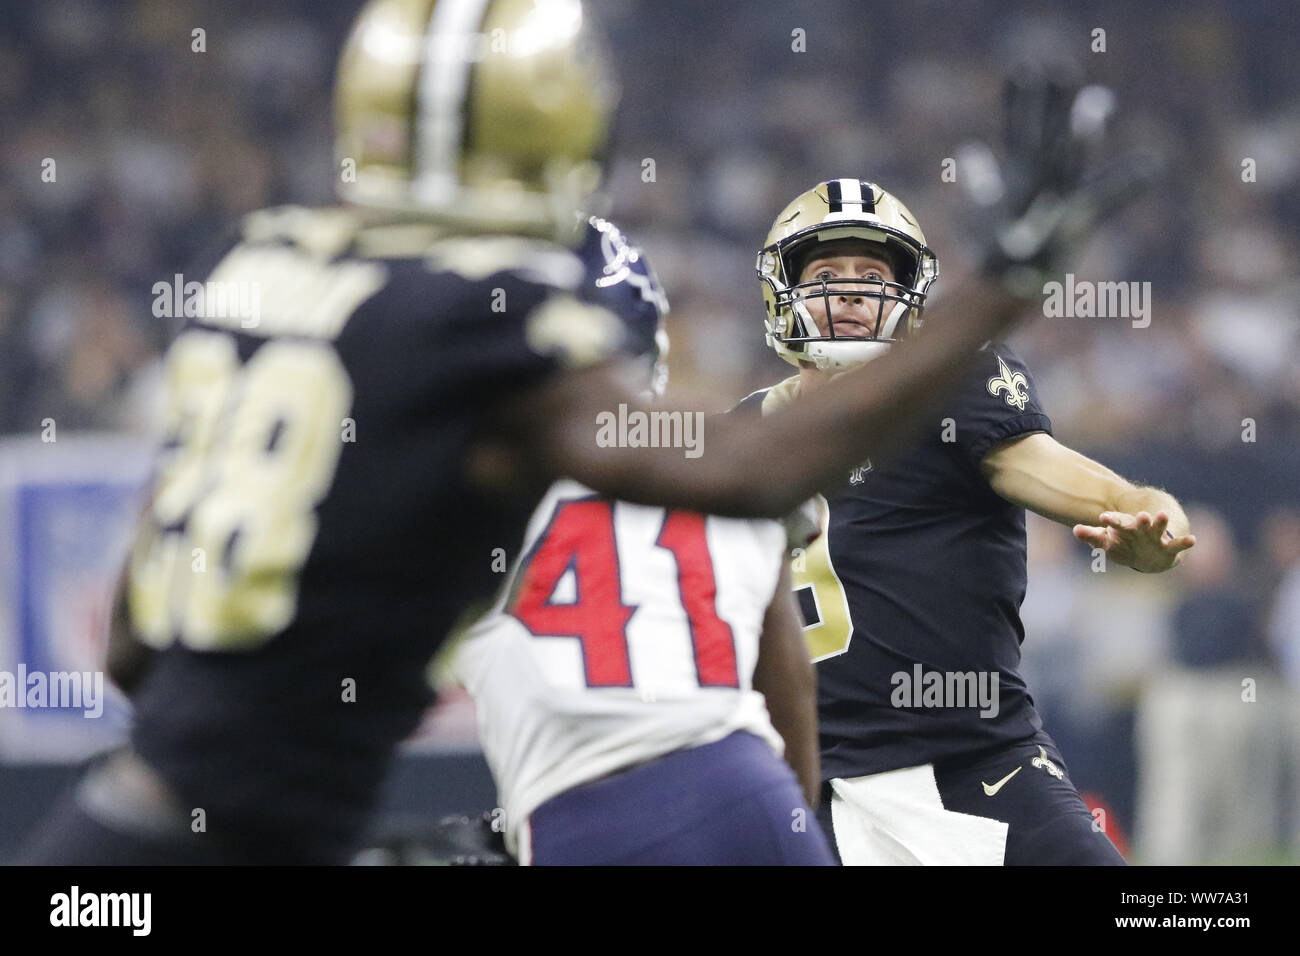 New Orleans, LOUISIANA, USA. 9th Sep, 2019. (left to right) New Orleans Saints running back Latavius Murray looks past Houston Texans inside linebacker Zach Cunningham to receive a pass from New Orleans Saints quarterback Drew Brees in New Orleans, Louisiana USA on September 9, 2019. The Saints beat the Texans 30-28. Credit: Dan Anderson/ZUMA Wire/Alamy Live News Stock Photo